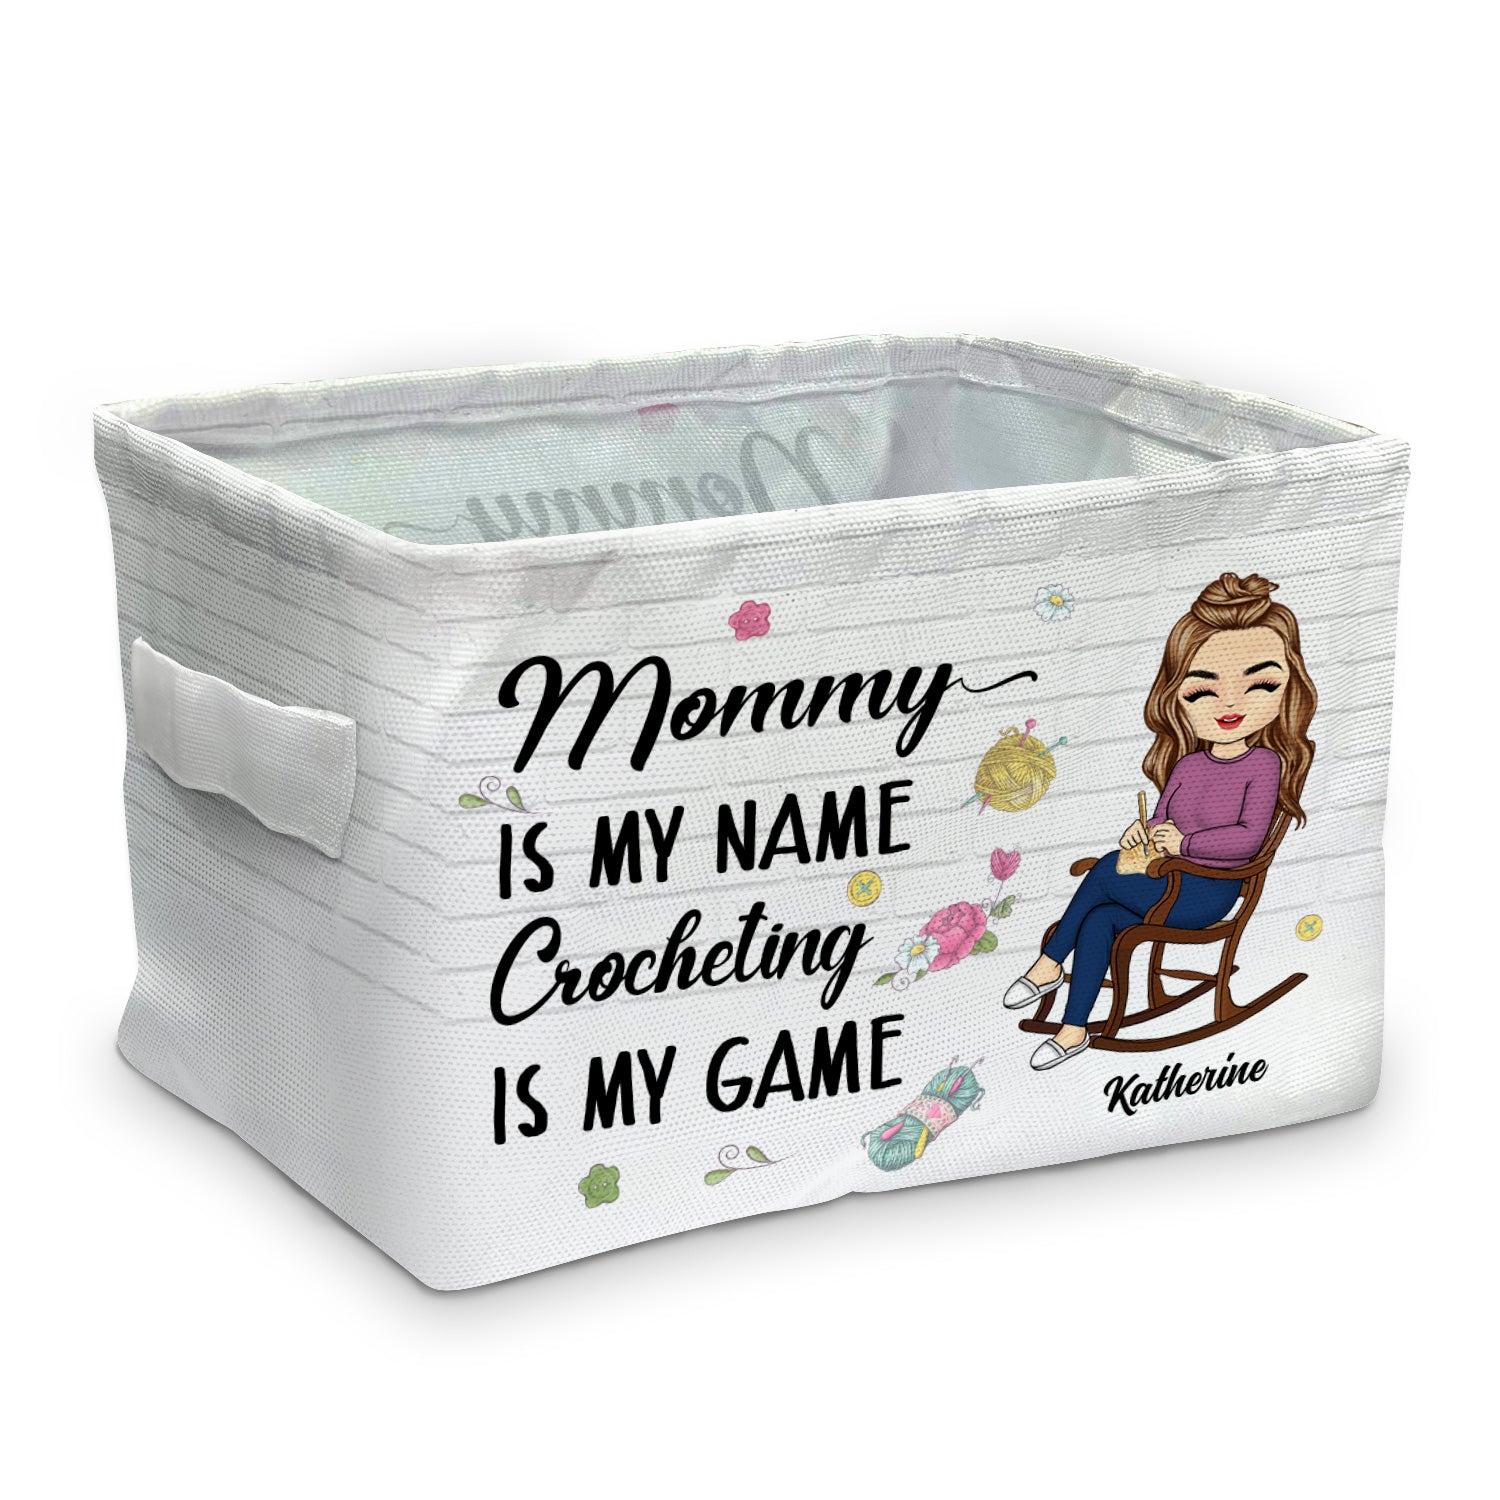 Crocheting Is My Game - Gift For Grandma & Mother - Personalized Storage Box